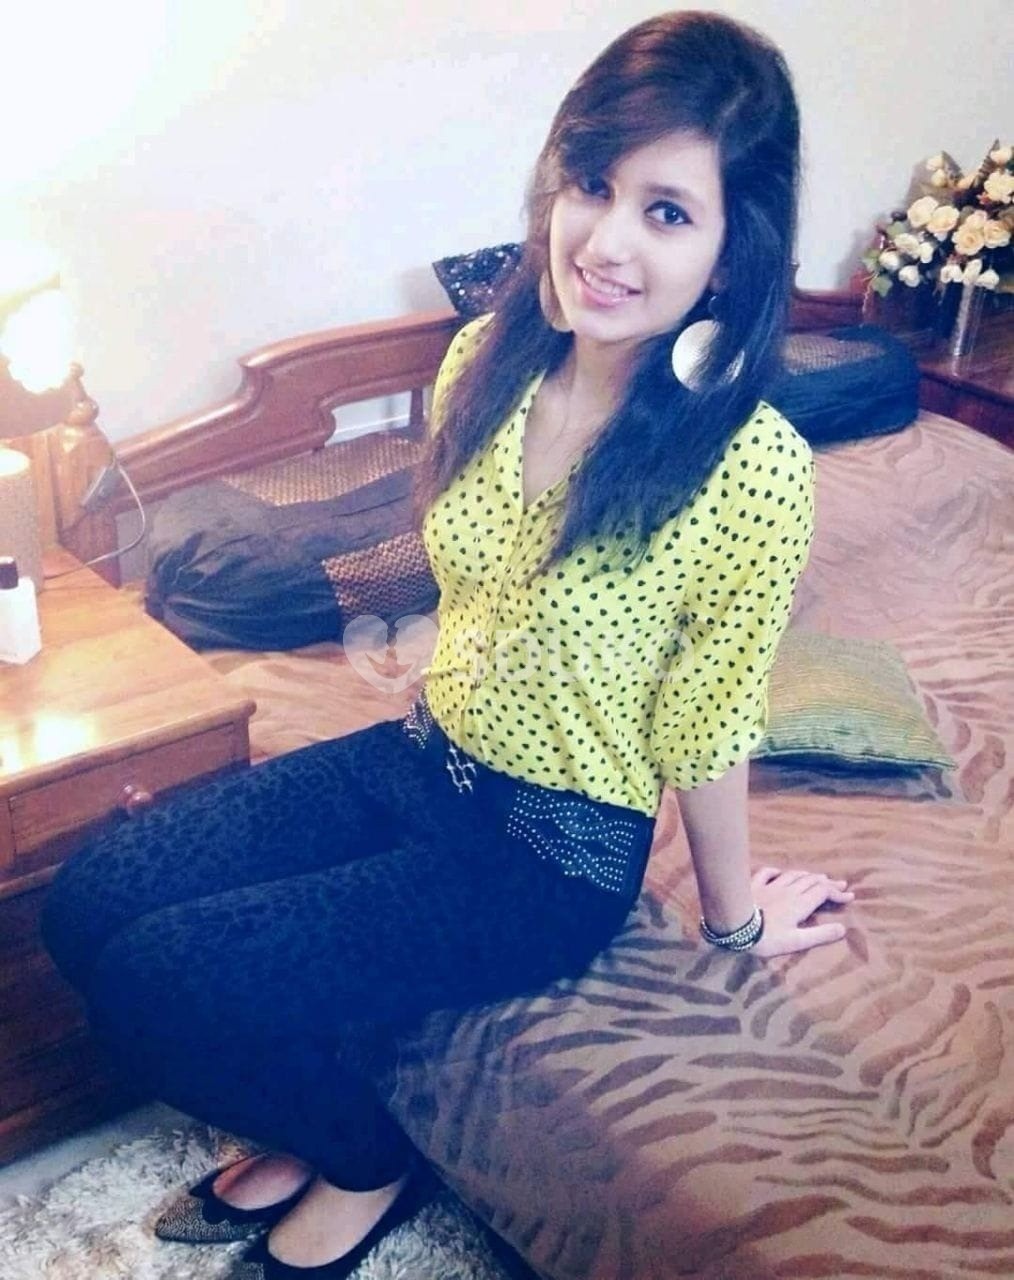 Call girl in Chennai self and secure high profile girl available now/